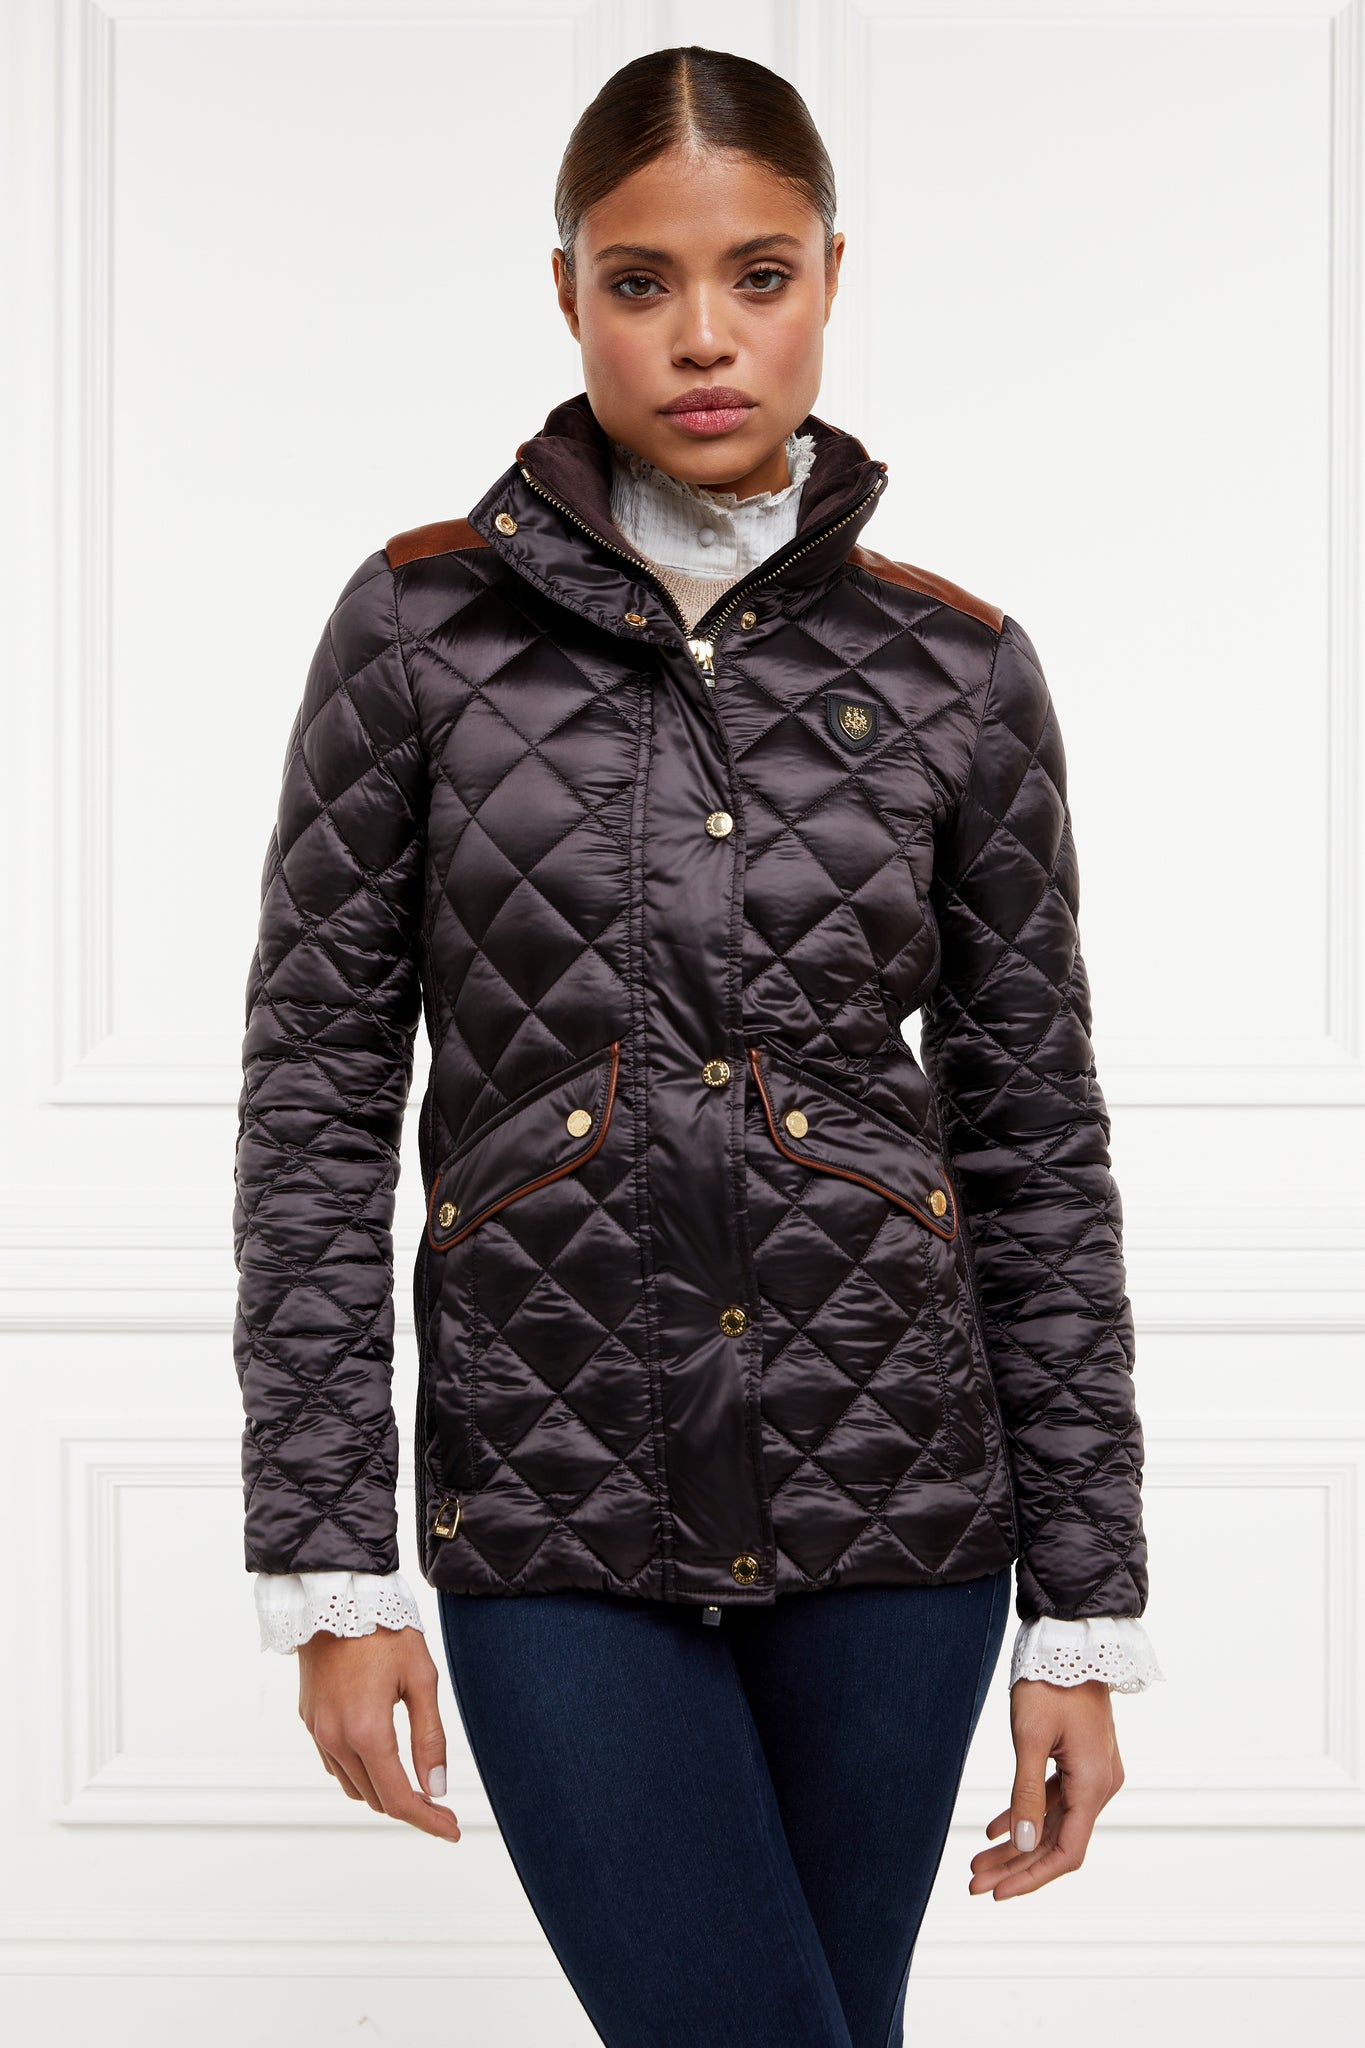 womens diamond quilted chocolate jacket with contrast tan leather elbow and shoulder pads large front pockets and shirred side panels